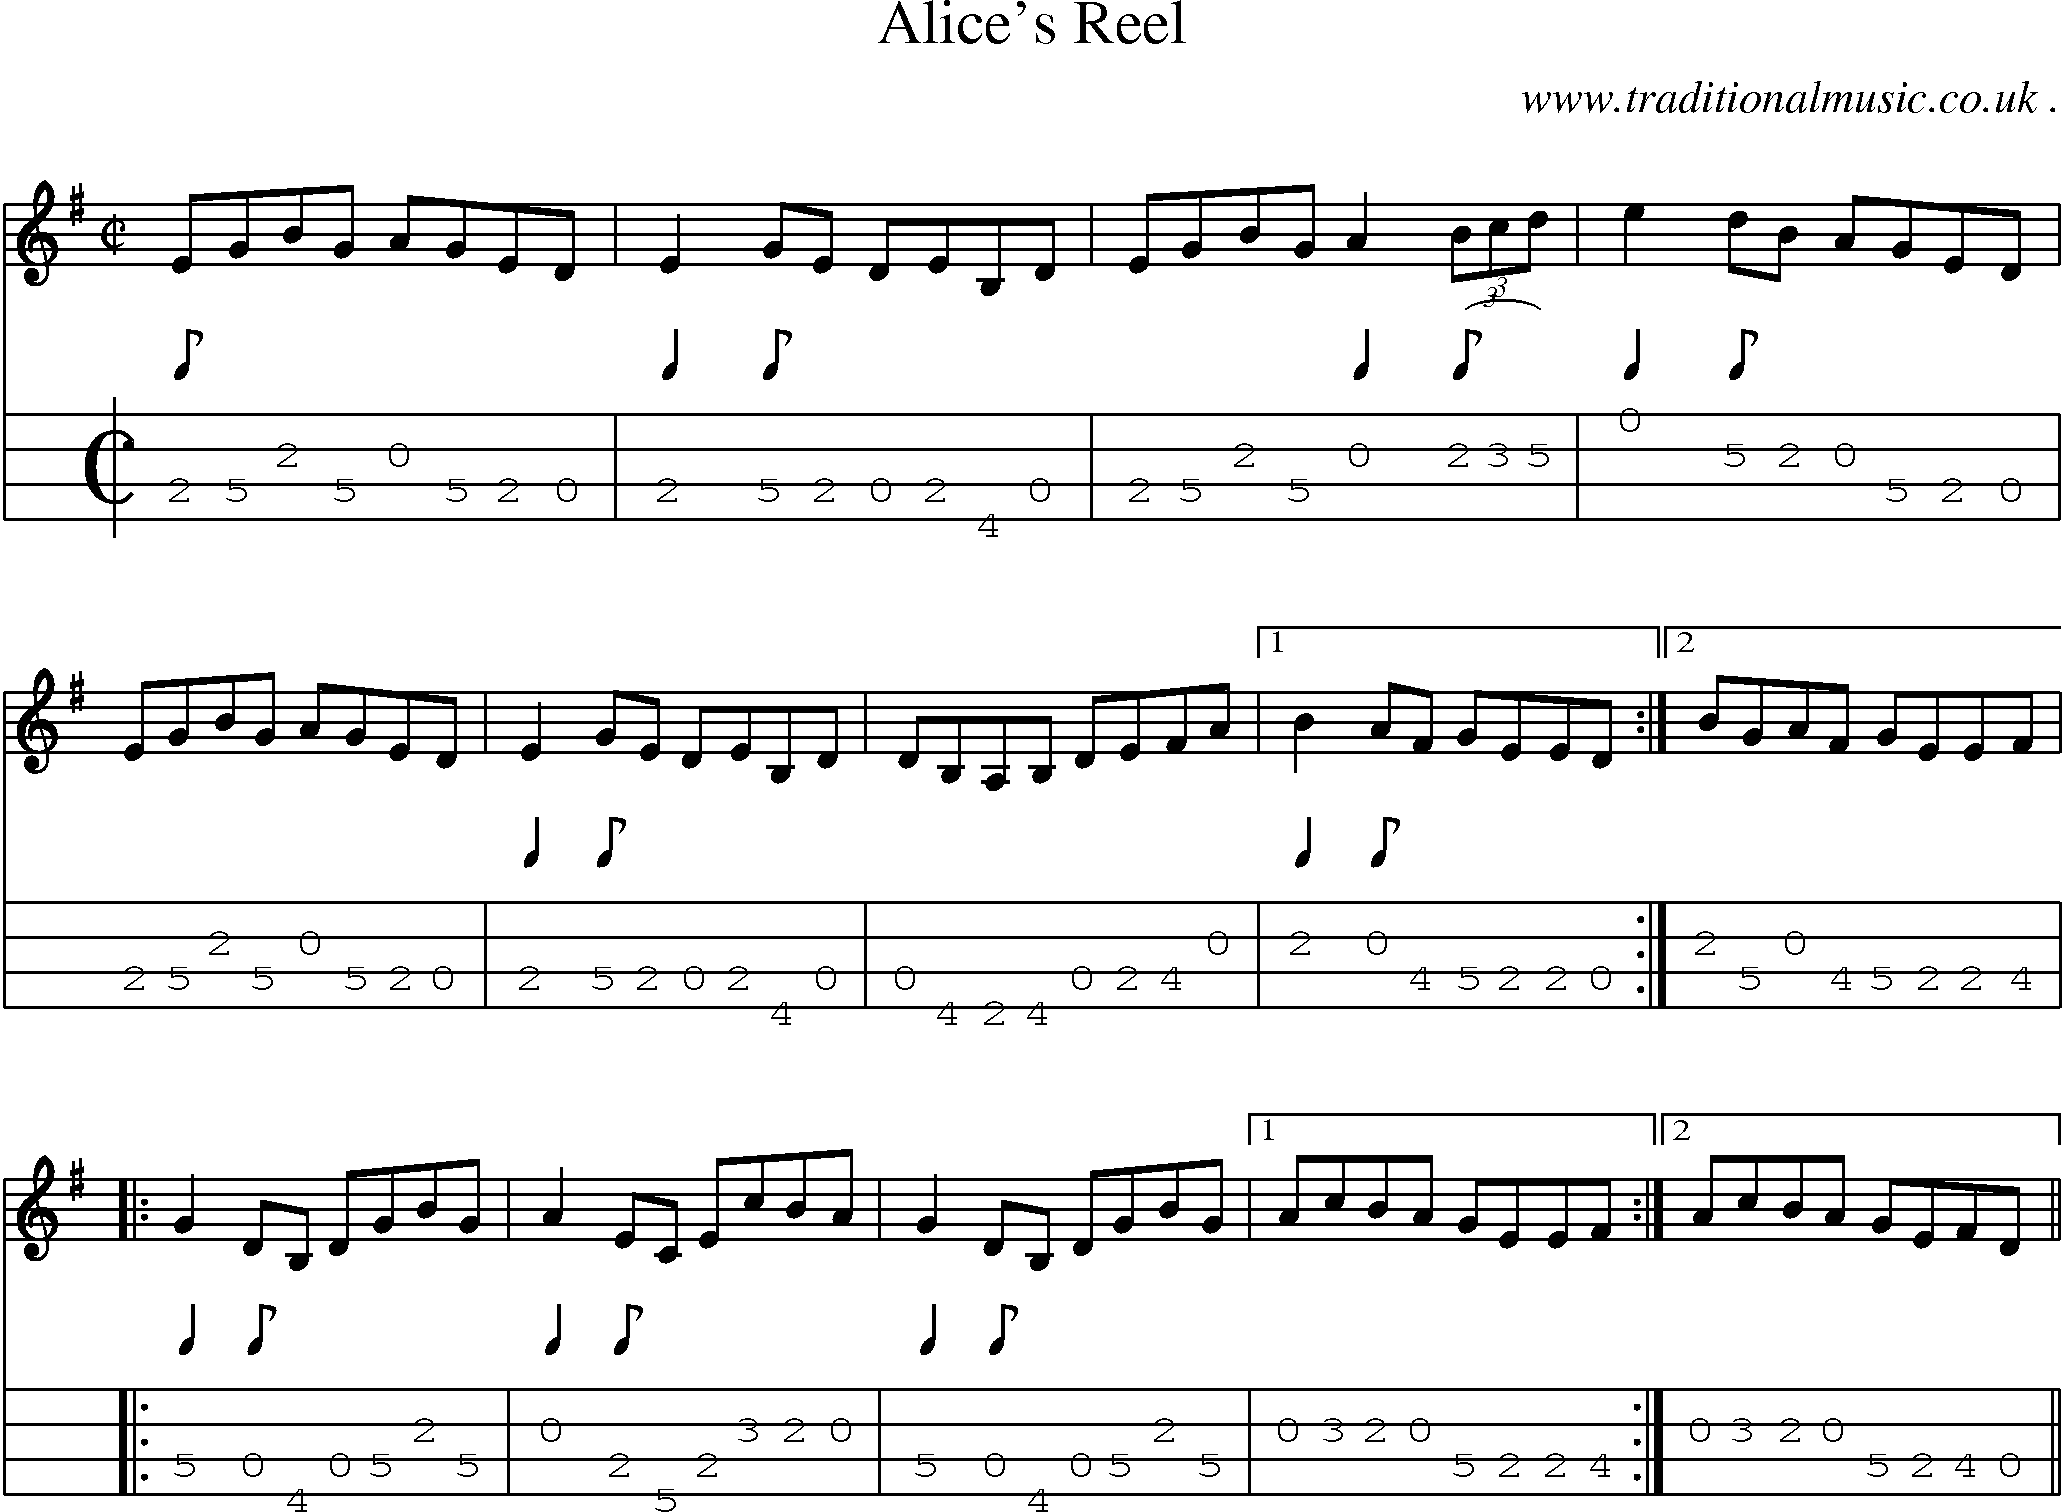 Sheet-Music and Mandolin Tabs for Alices Reel